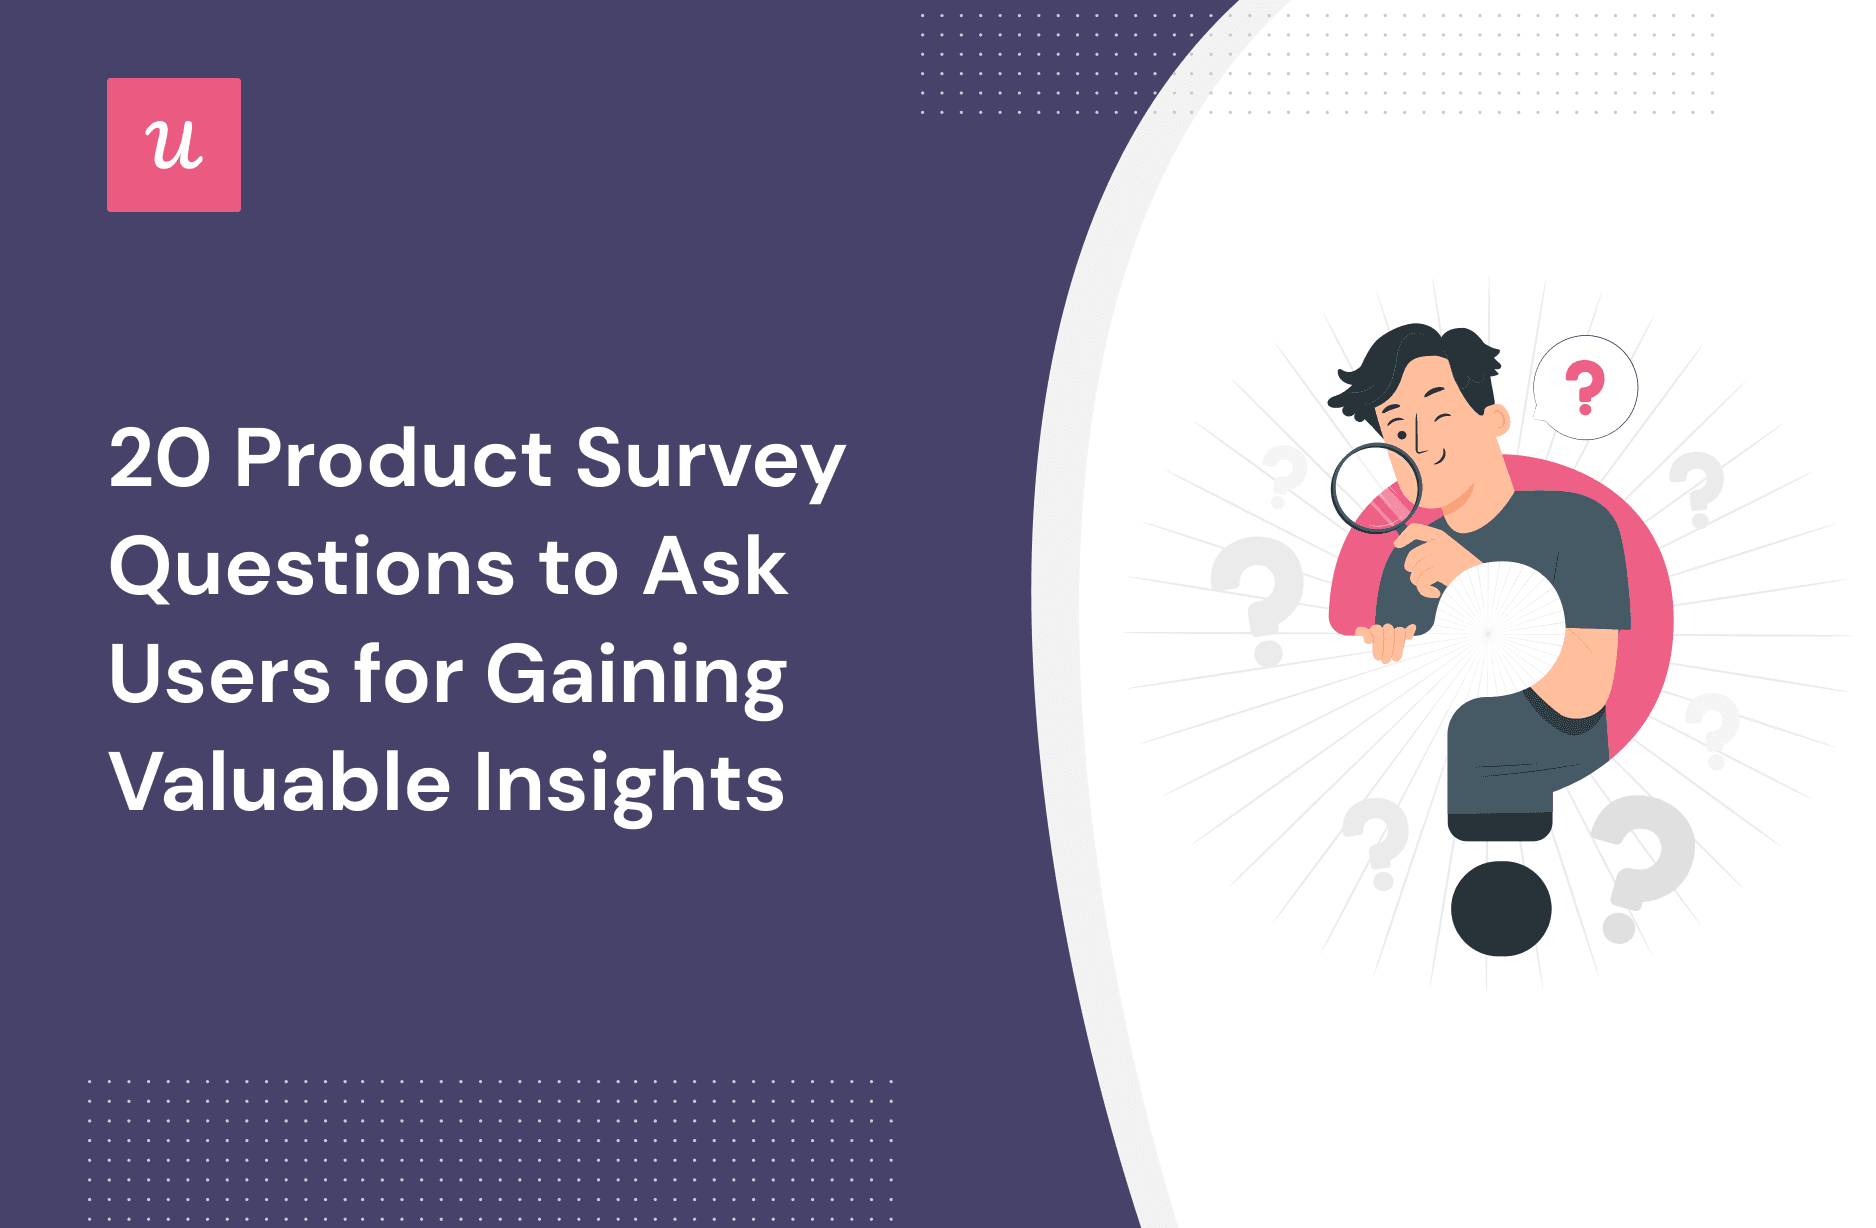 20 Product Survey Questions to Ask Users for Gaining Valuable Insights cover